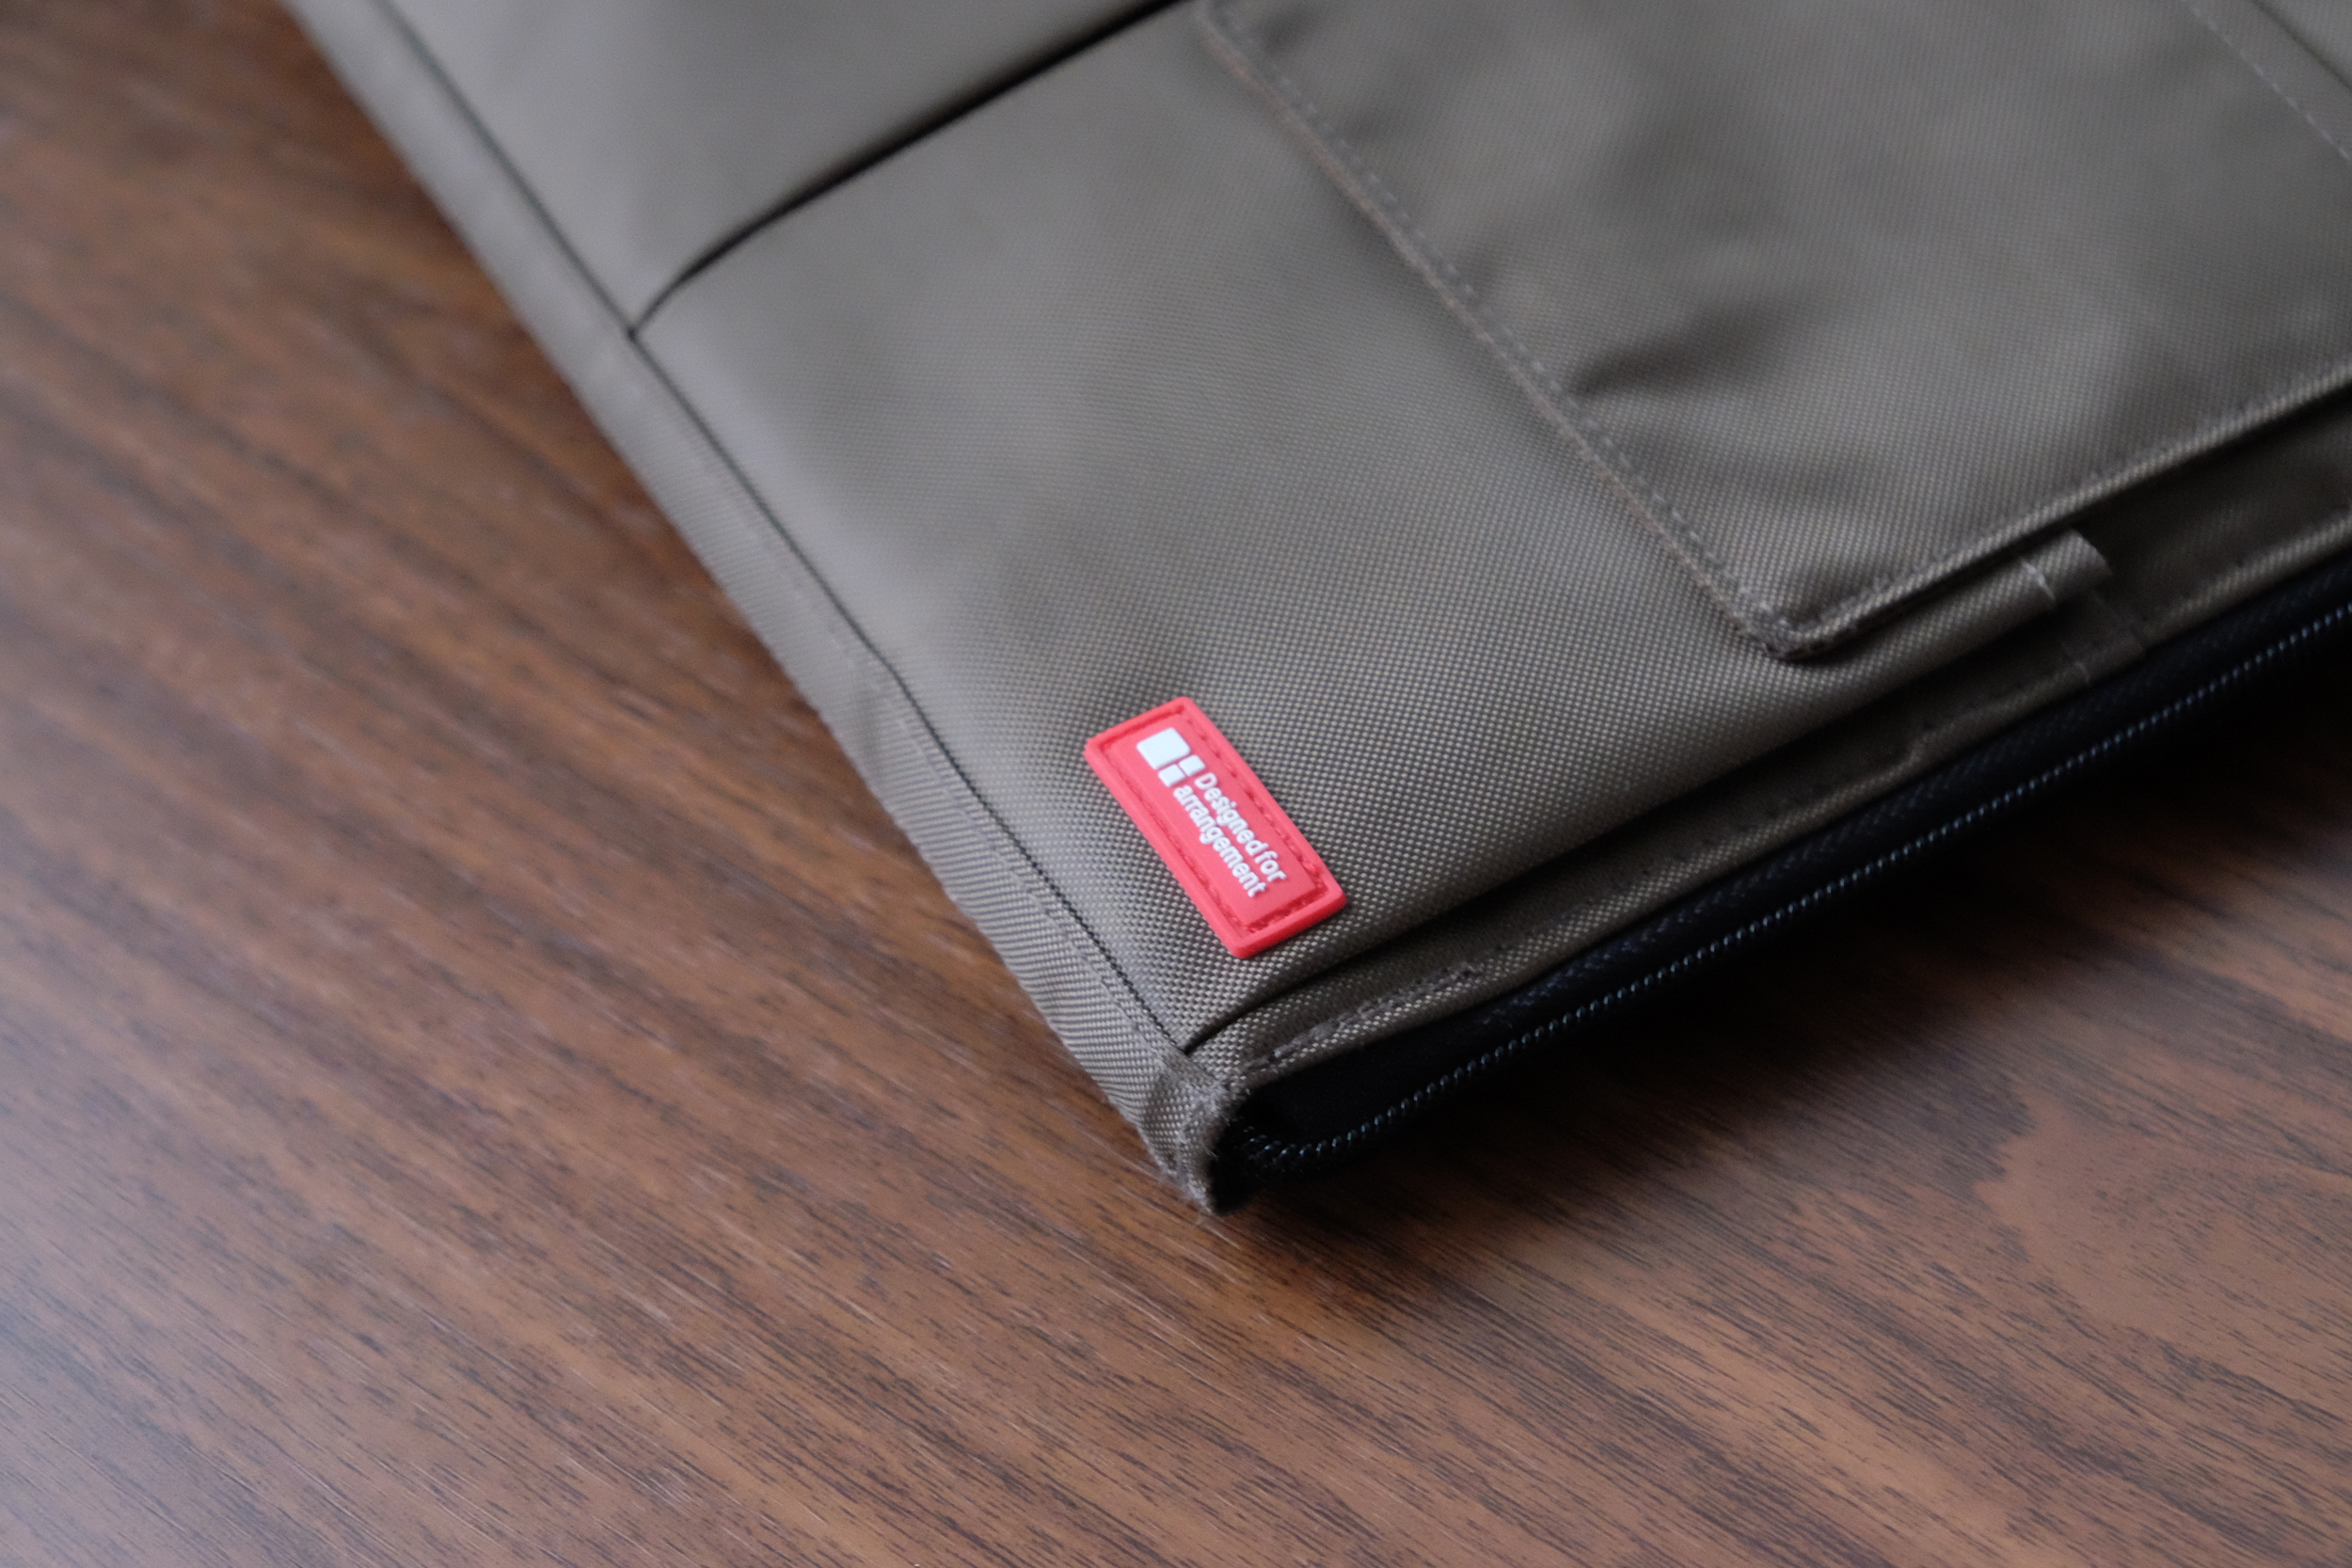 Reasonably Priced Pen Carry: Lihit Lab Bags and Cases — The